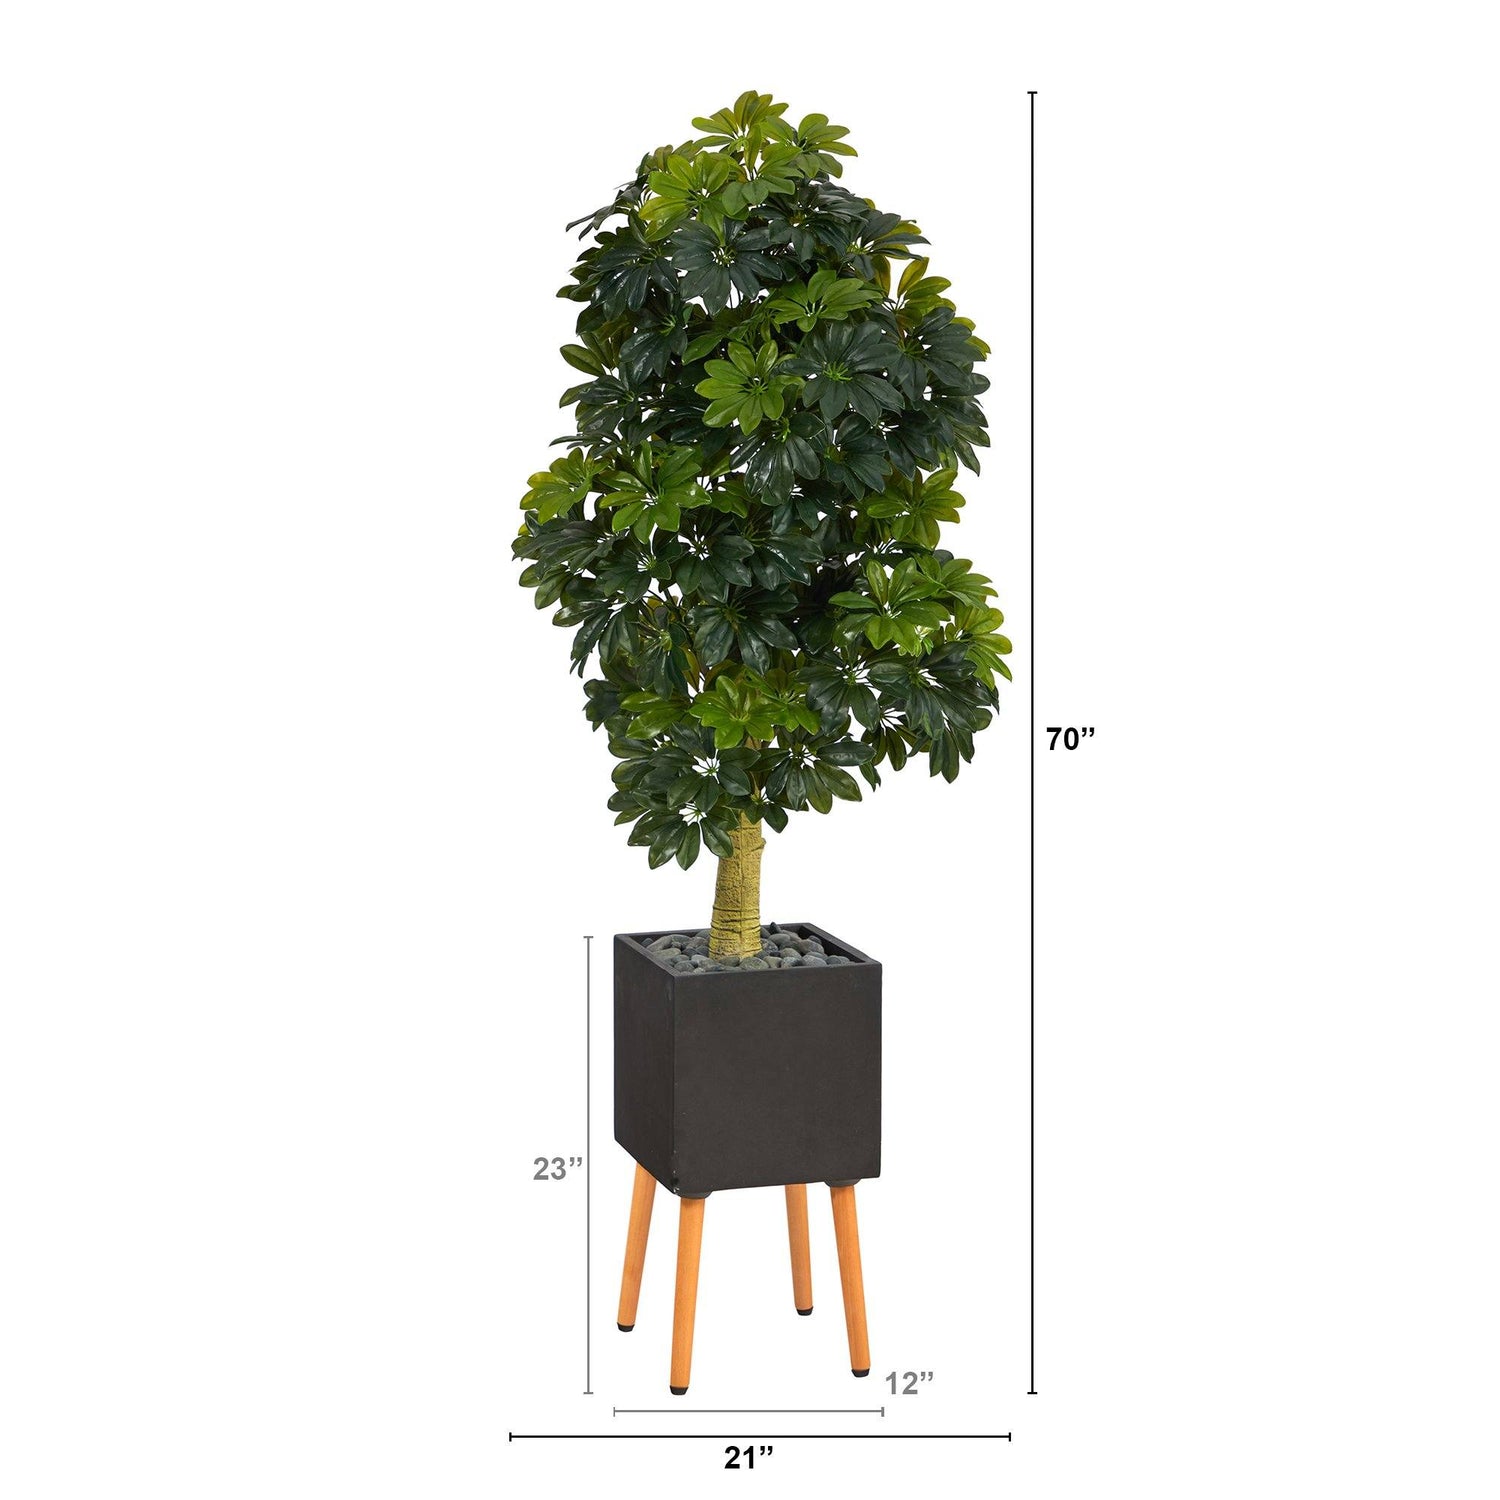 70” Schefflera Artificial Tree in Black Planter with Stand (Real Touch)